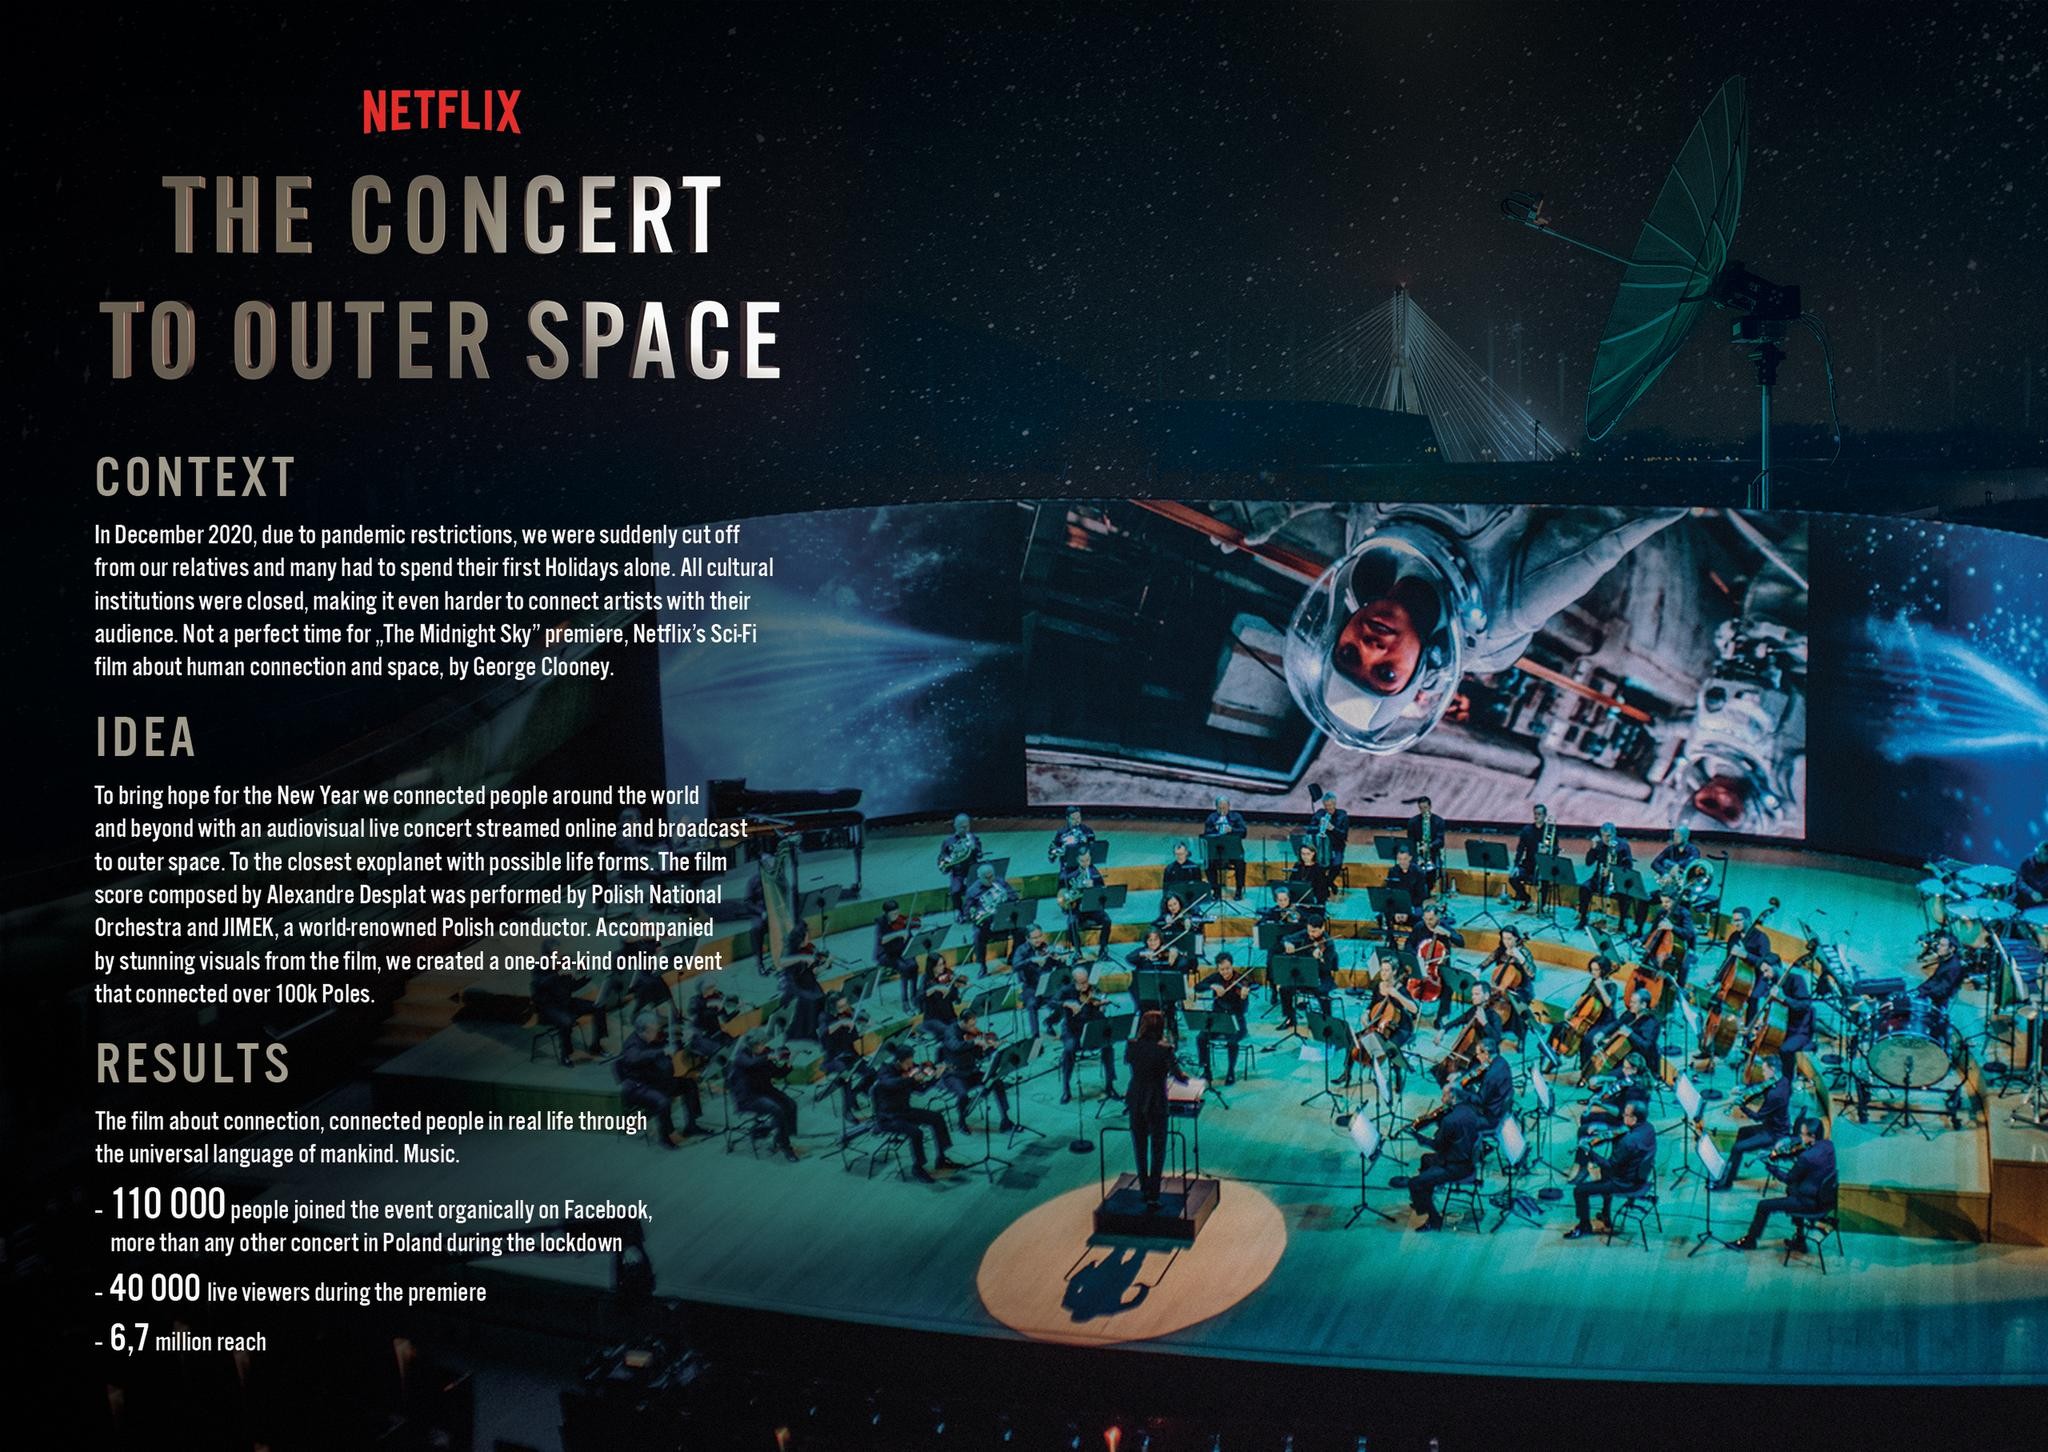 Concert to outer space